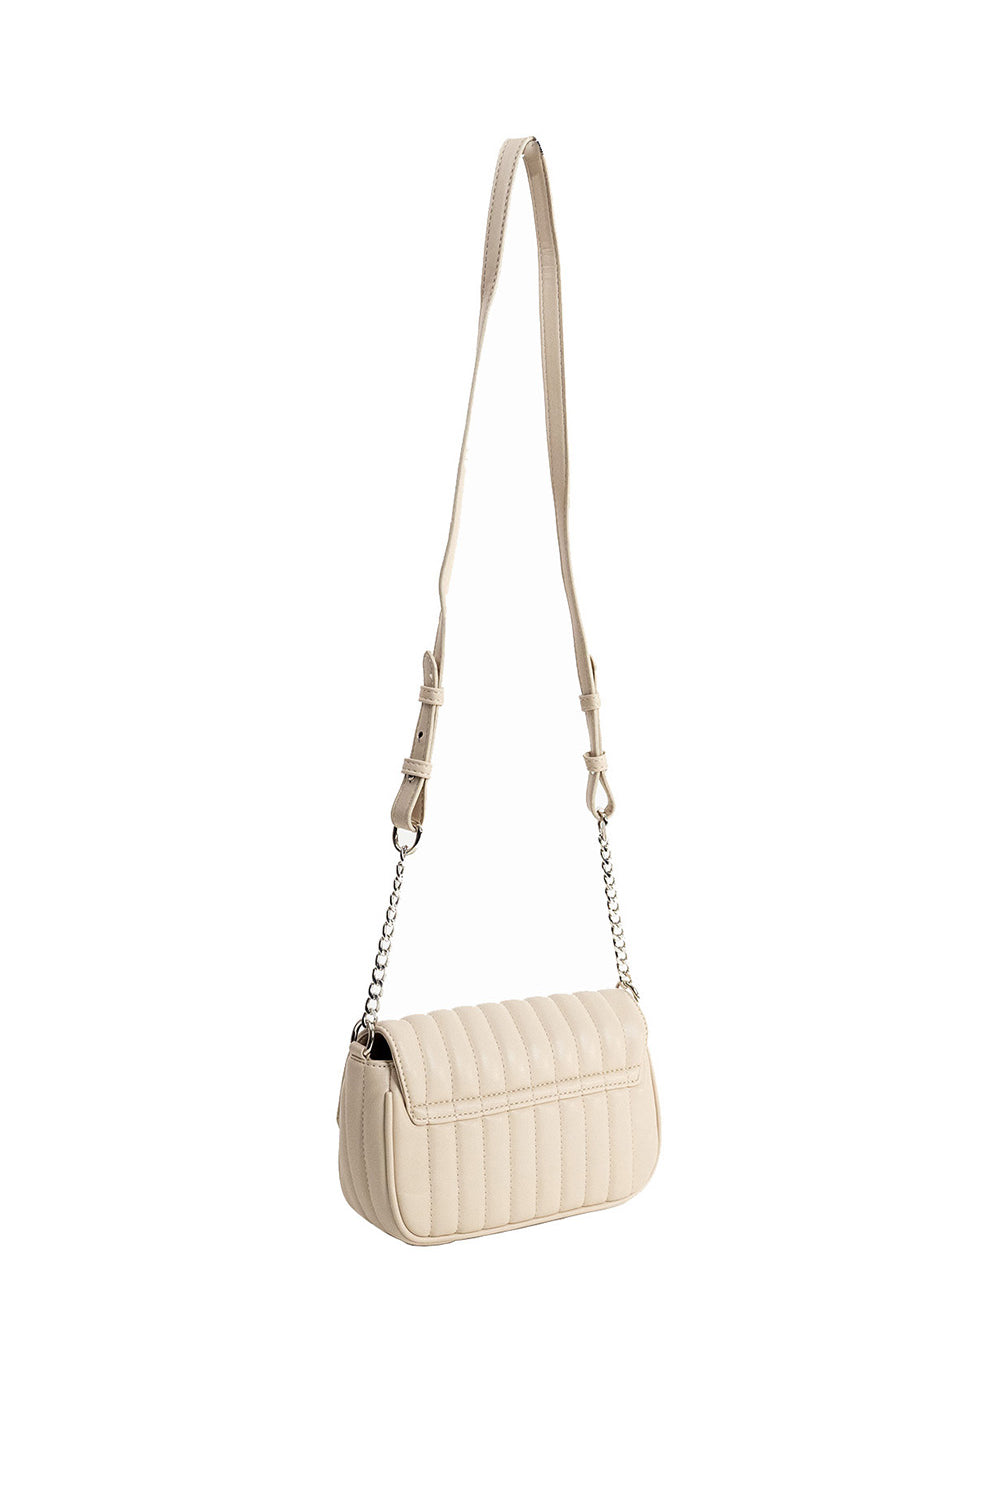 Padded Quilted Crossbody Bag | Beige Crossbody Bag | My Accessories London Bag